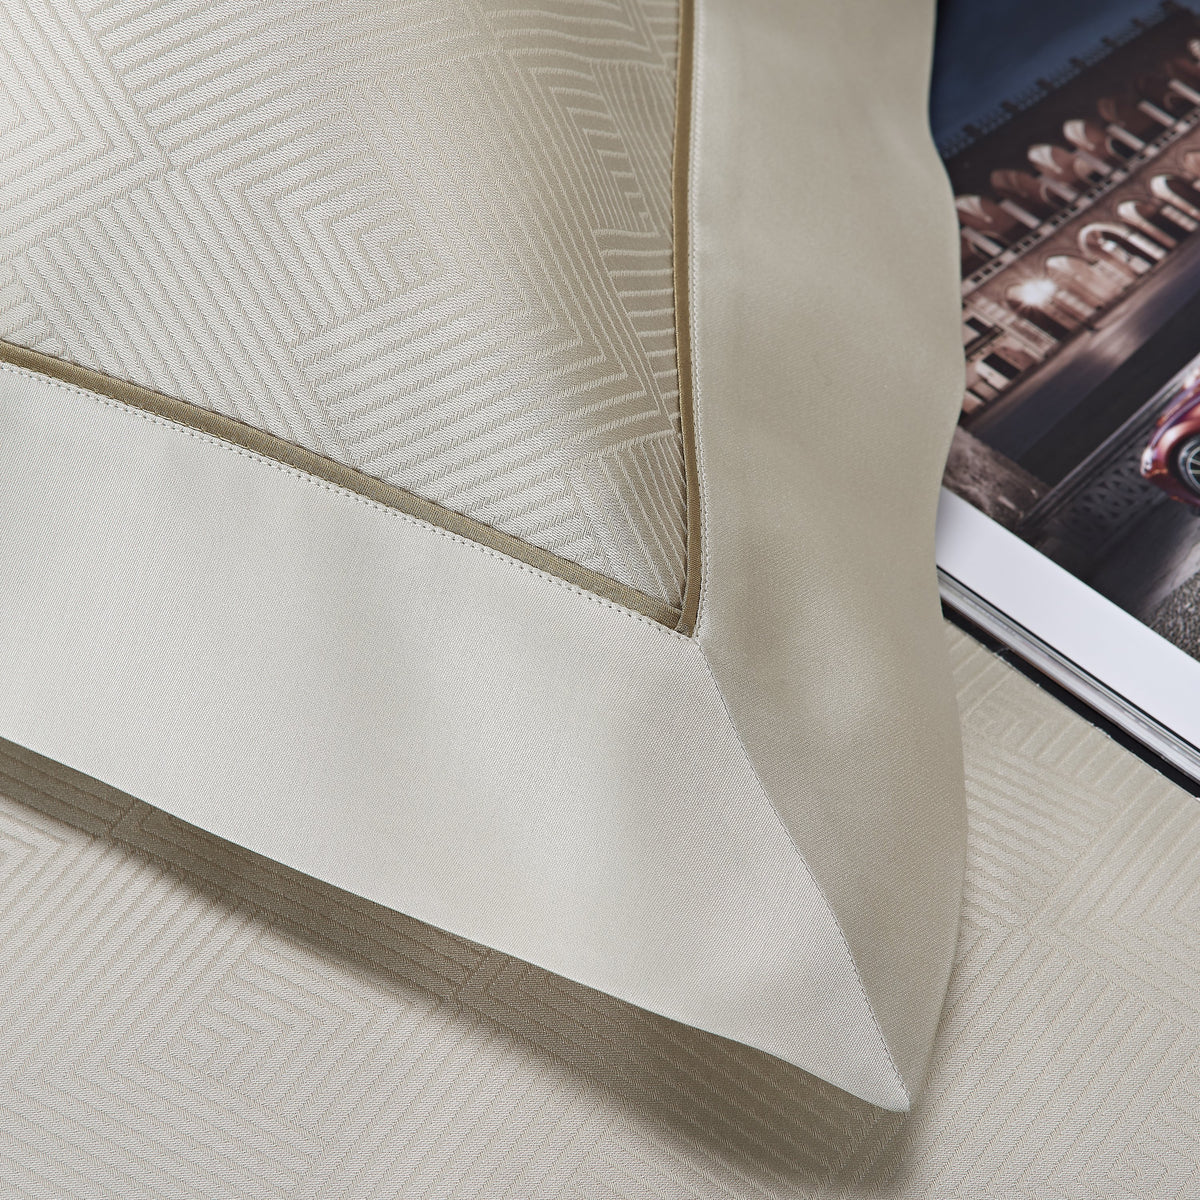 Luxurious Pure Egyptian Jacquard woven cotton Sateen bed linen, available in sand and a silver colour.